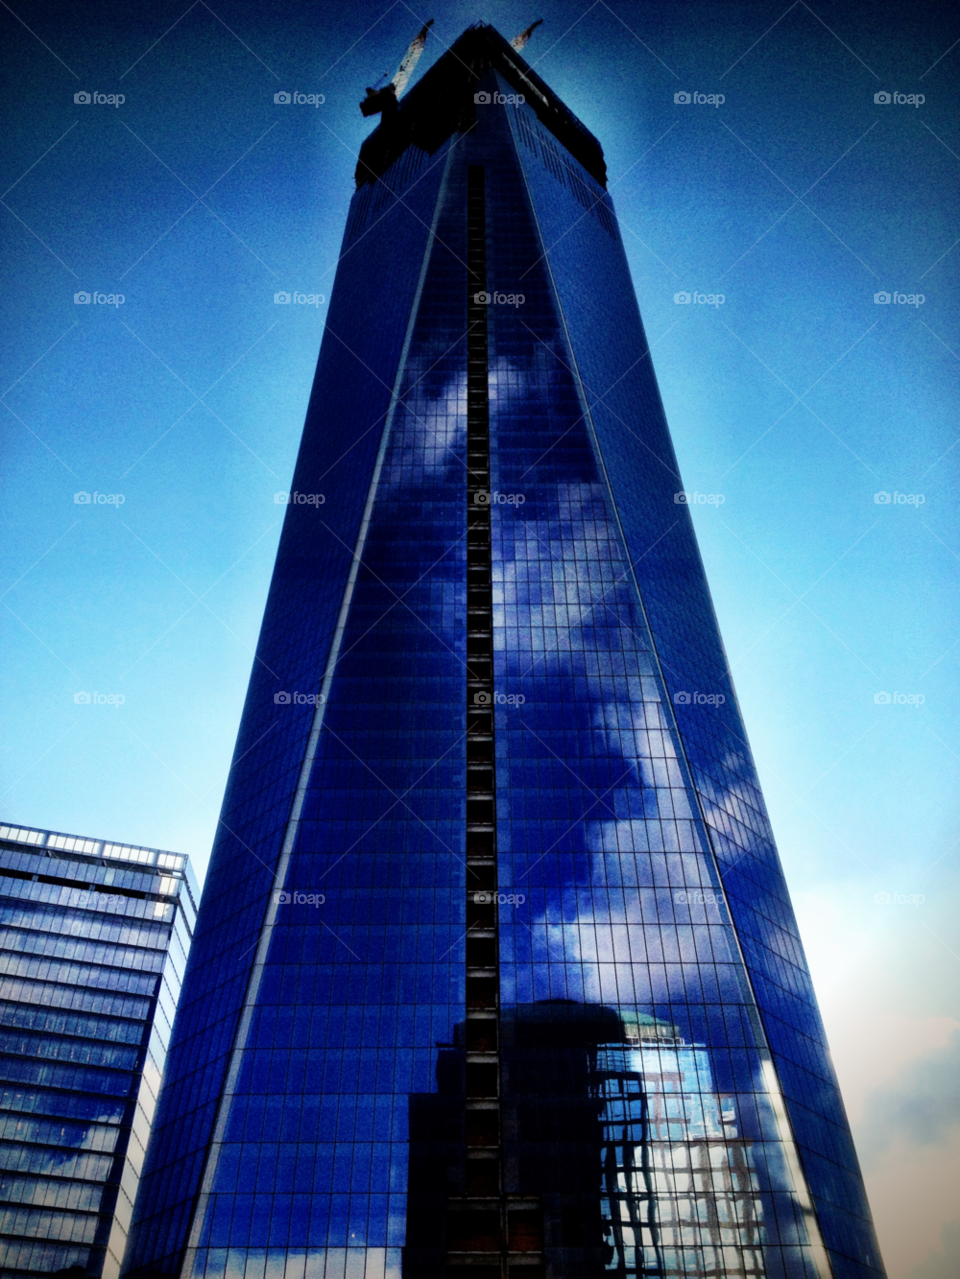 clouds blue sky nyc freedom tower by mingfoto